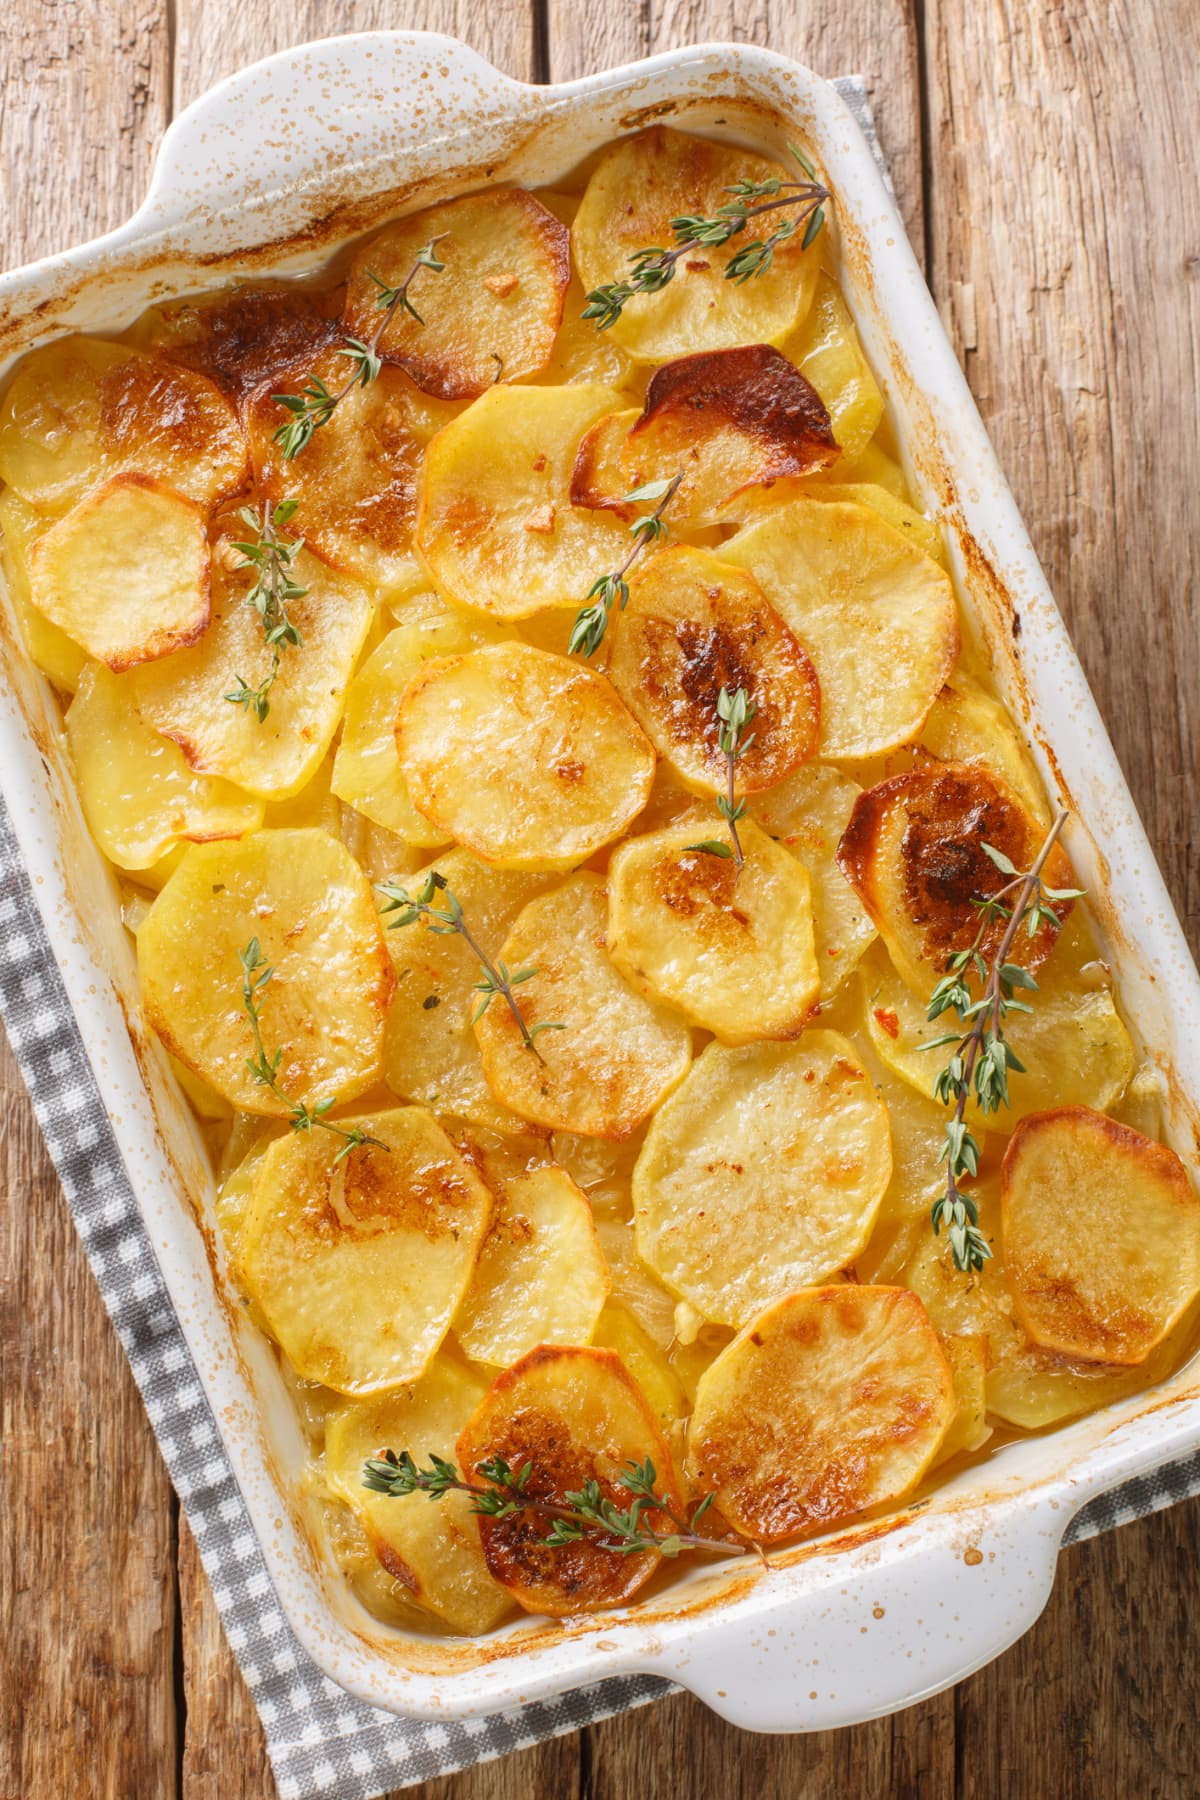 Baking tray of potatoes au gratin topped with fresh thyme sprigs